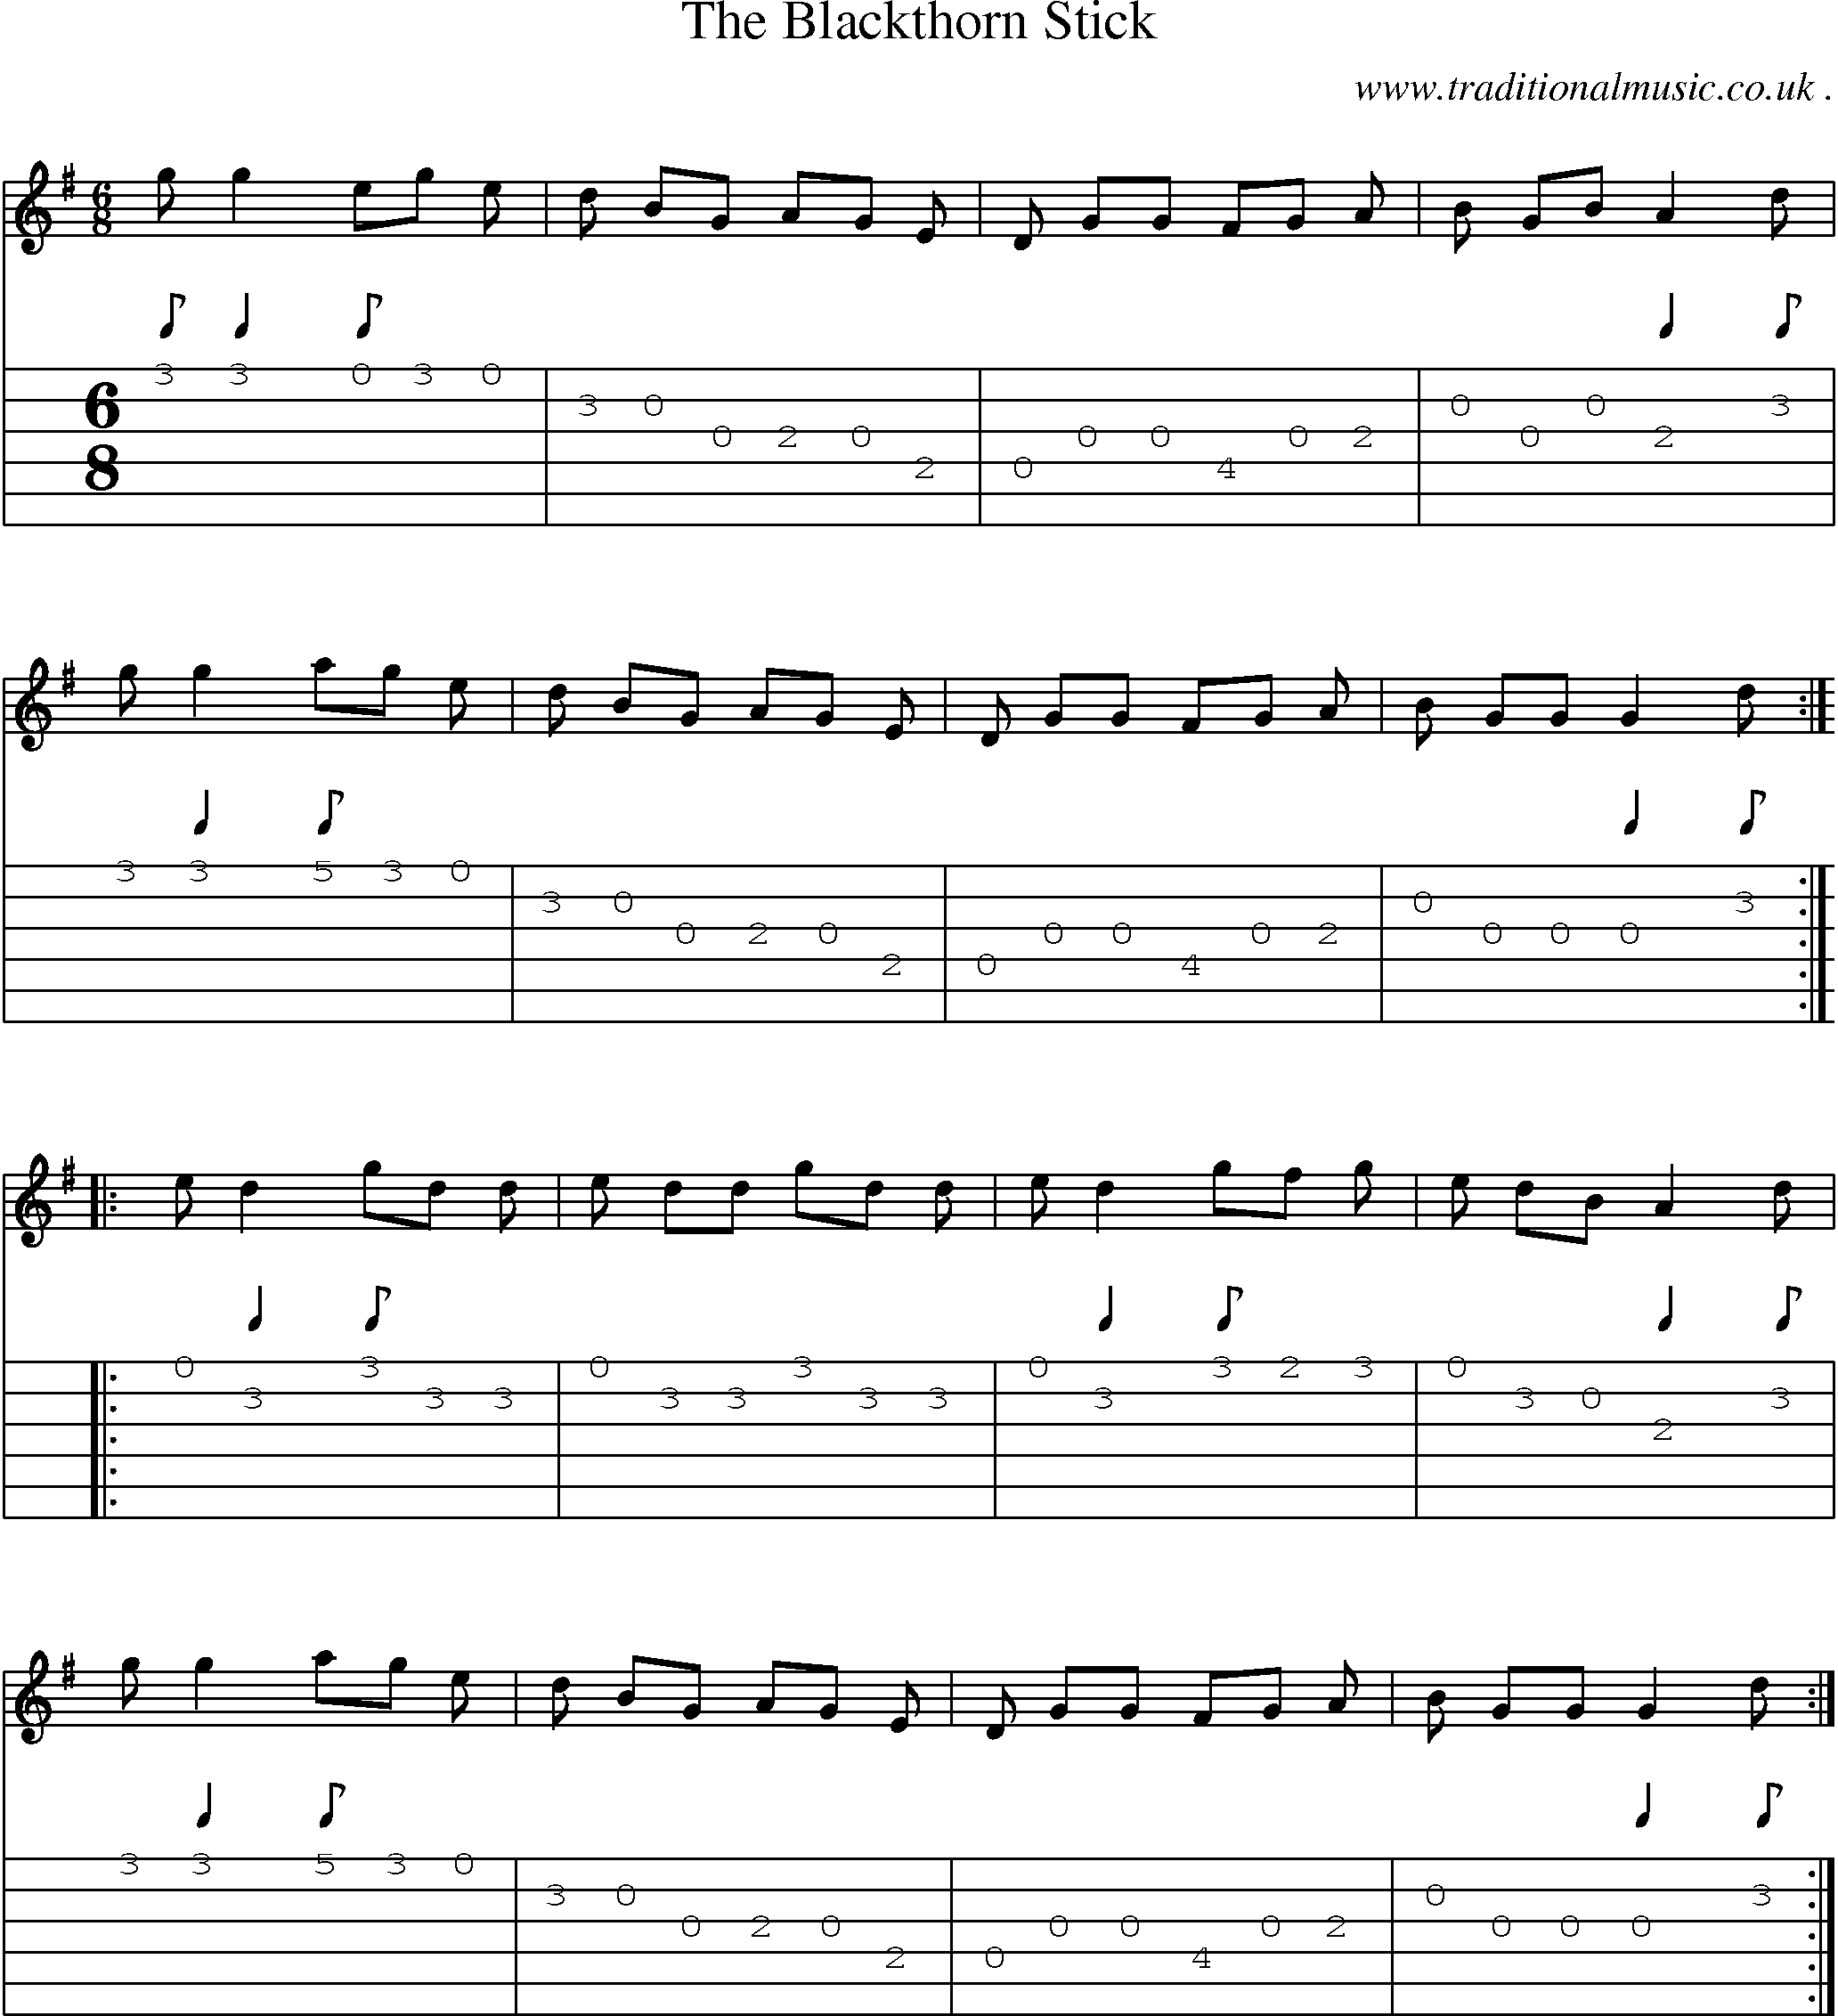 Sheet-Music and Guitar Tabs for The Blackthorn Stick